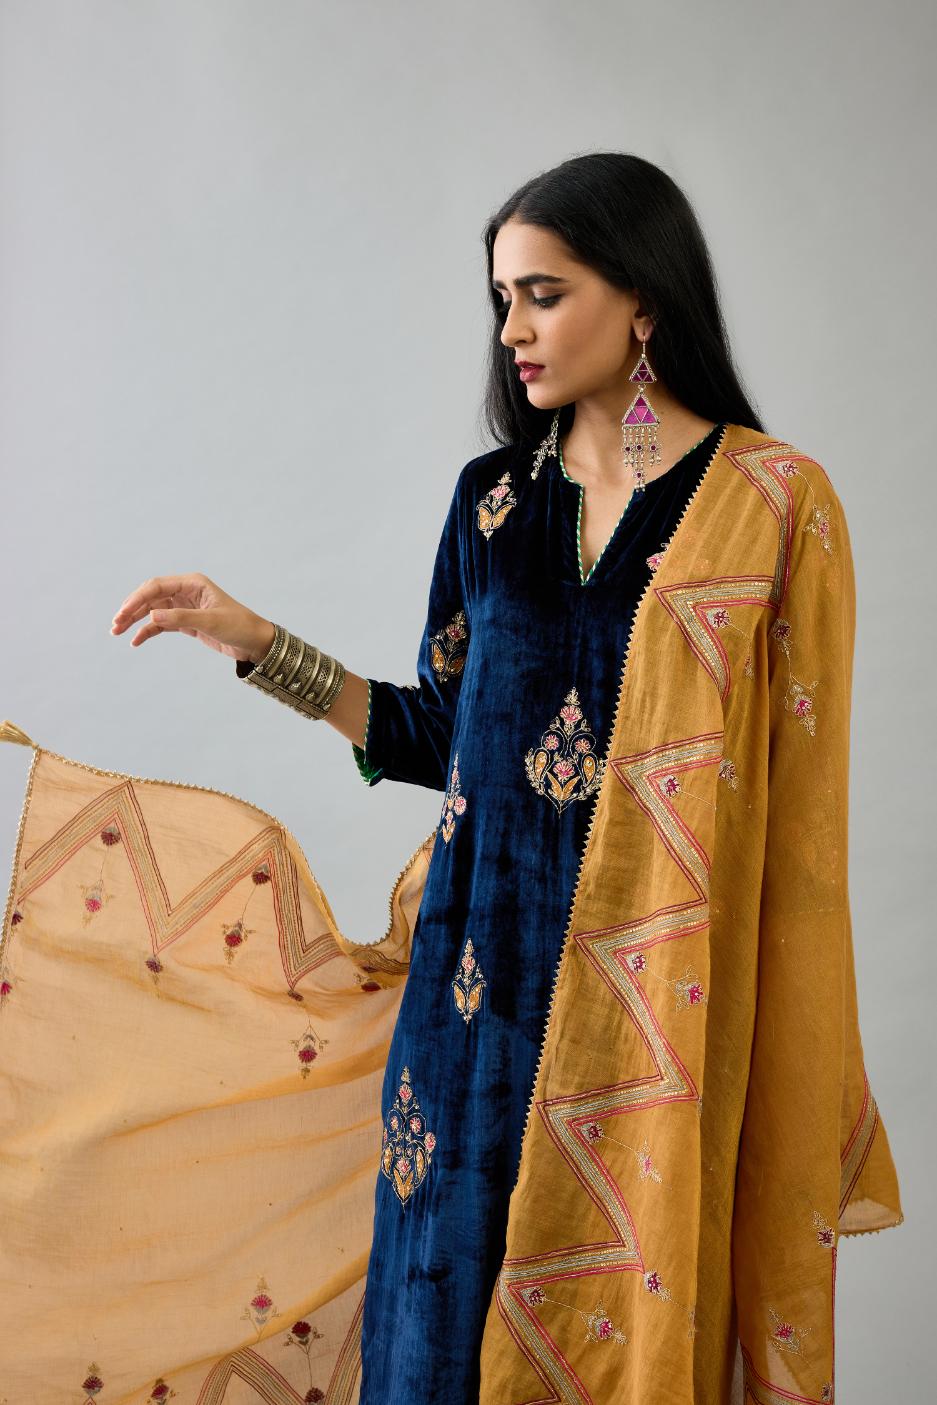 Golden yellow tissue chanderi dupatta in chevron pattern embroidery with contrast silk thread and dori at the sides.